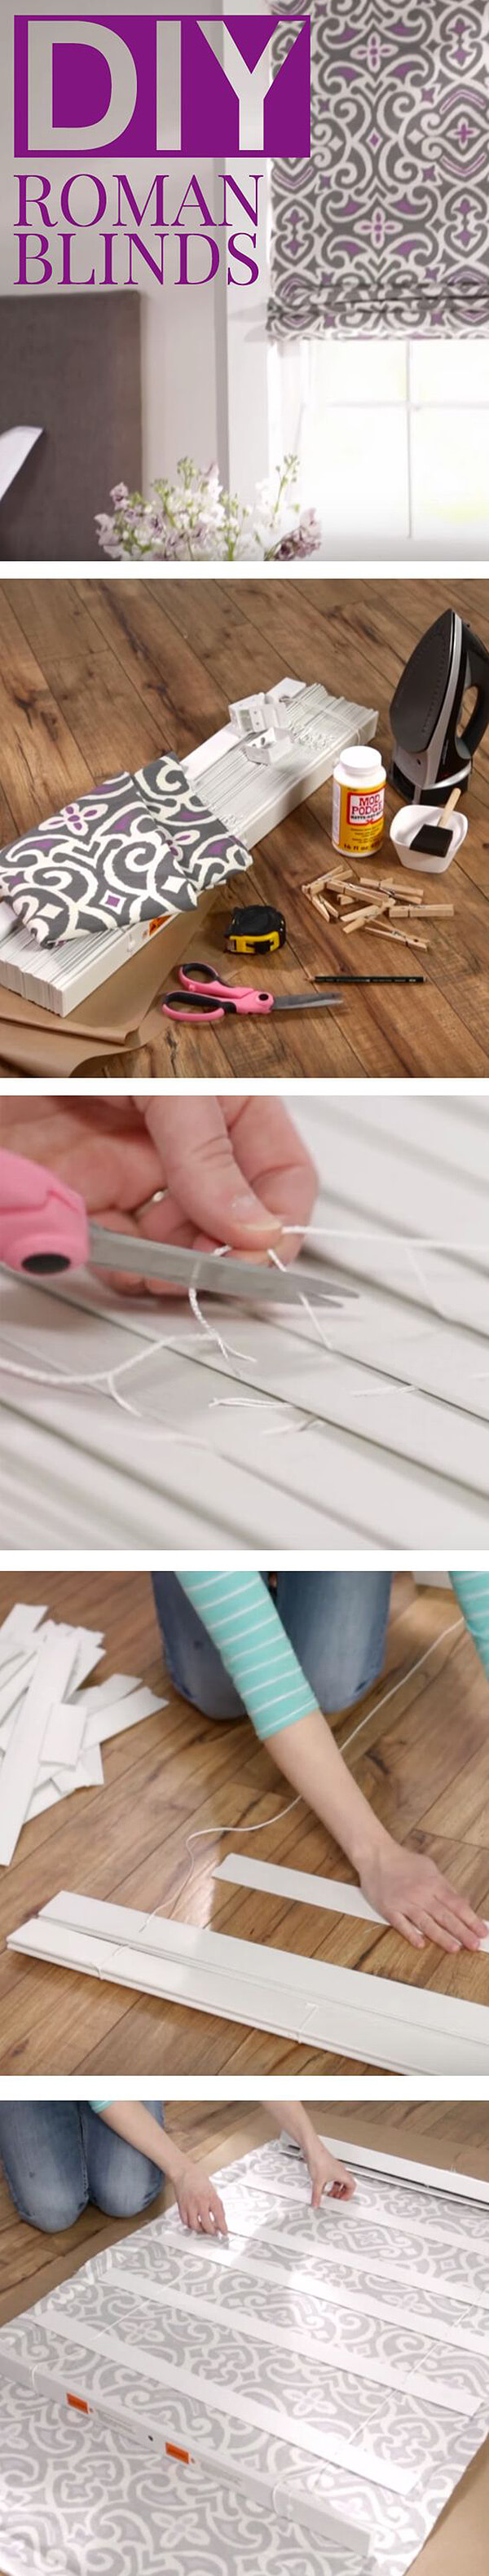 DIY Roman Blinds from Tired Mini-blinds